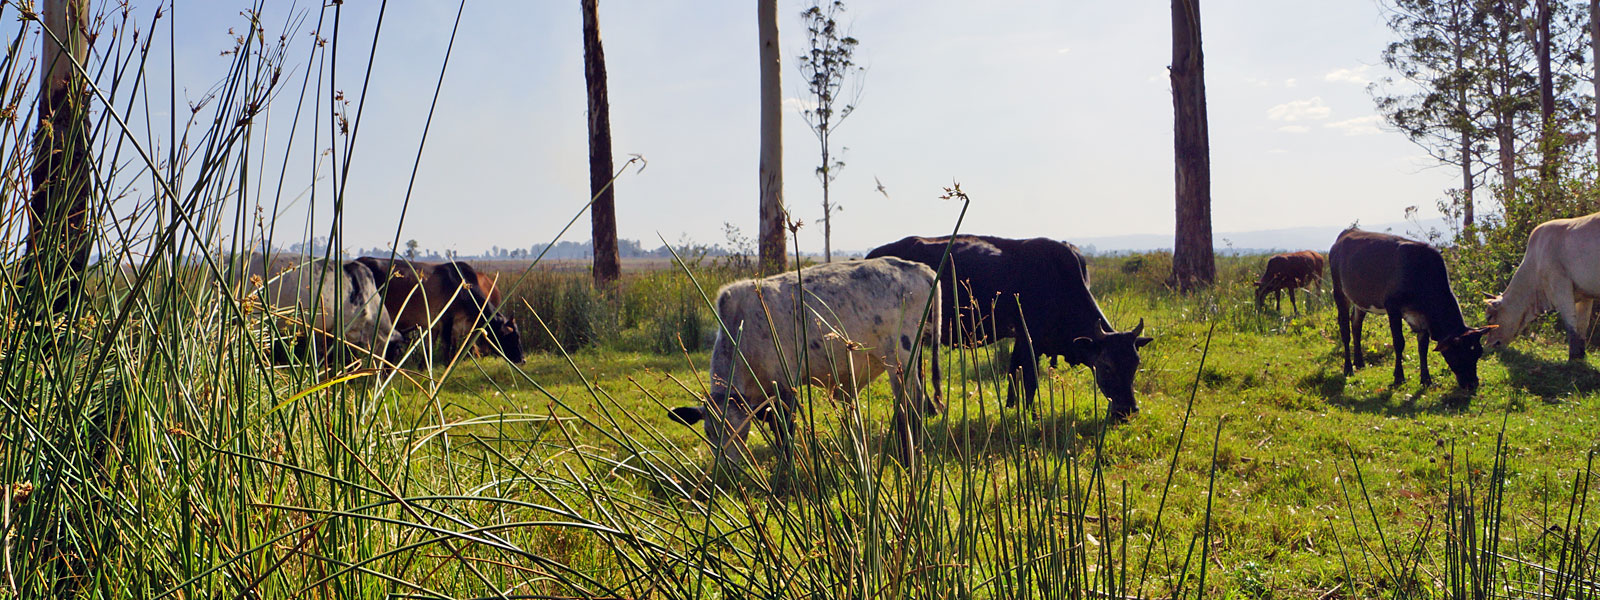 cows-on-field-2